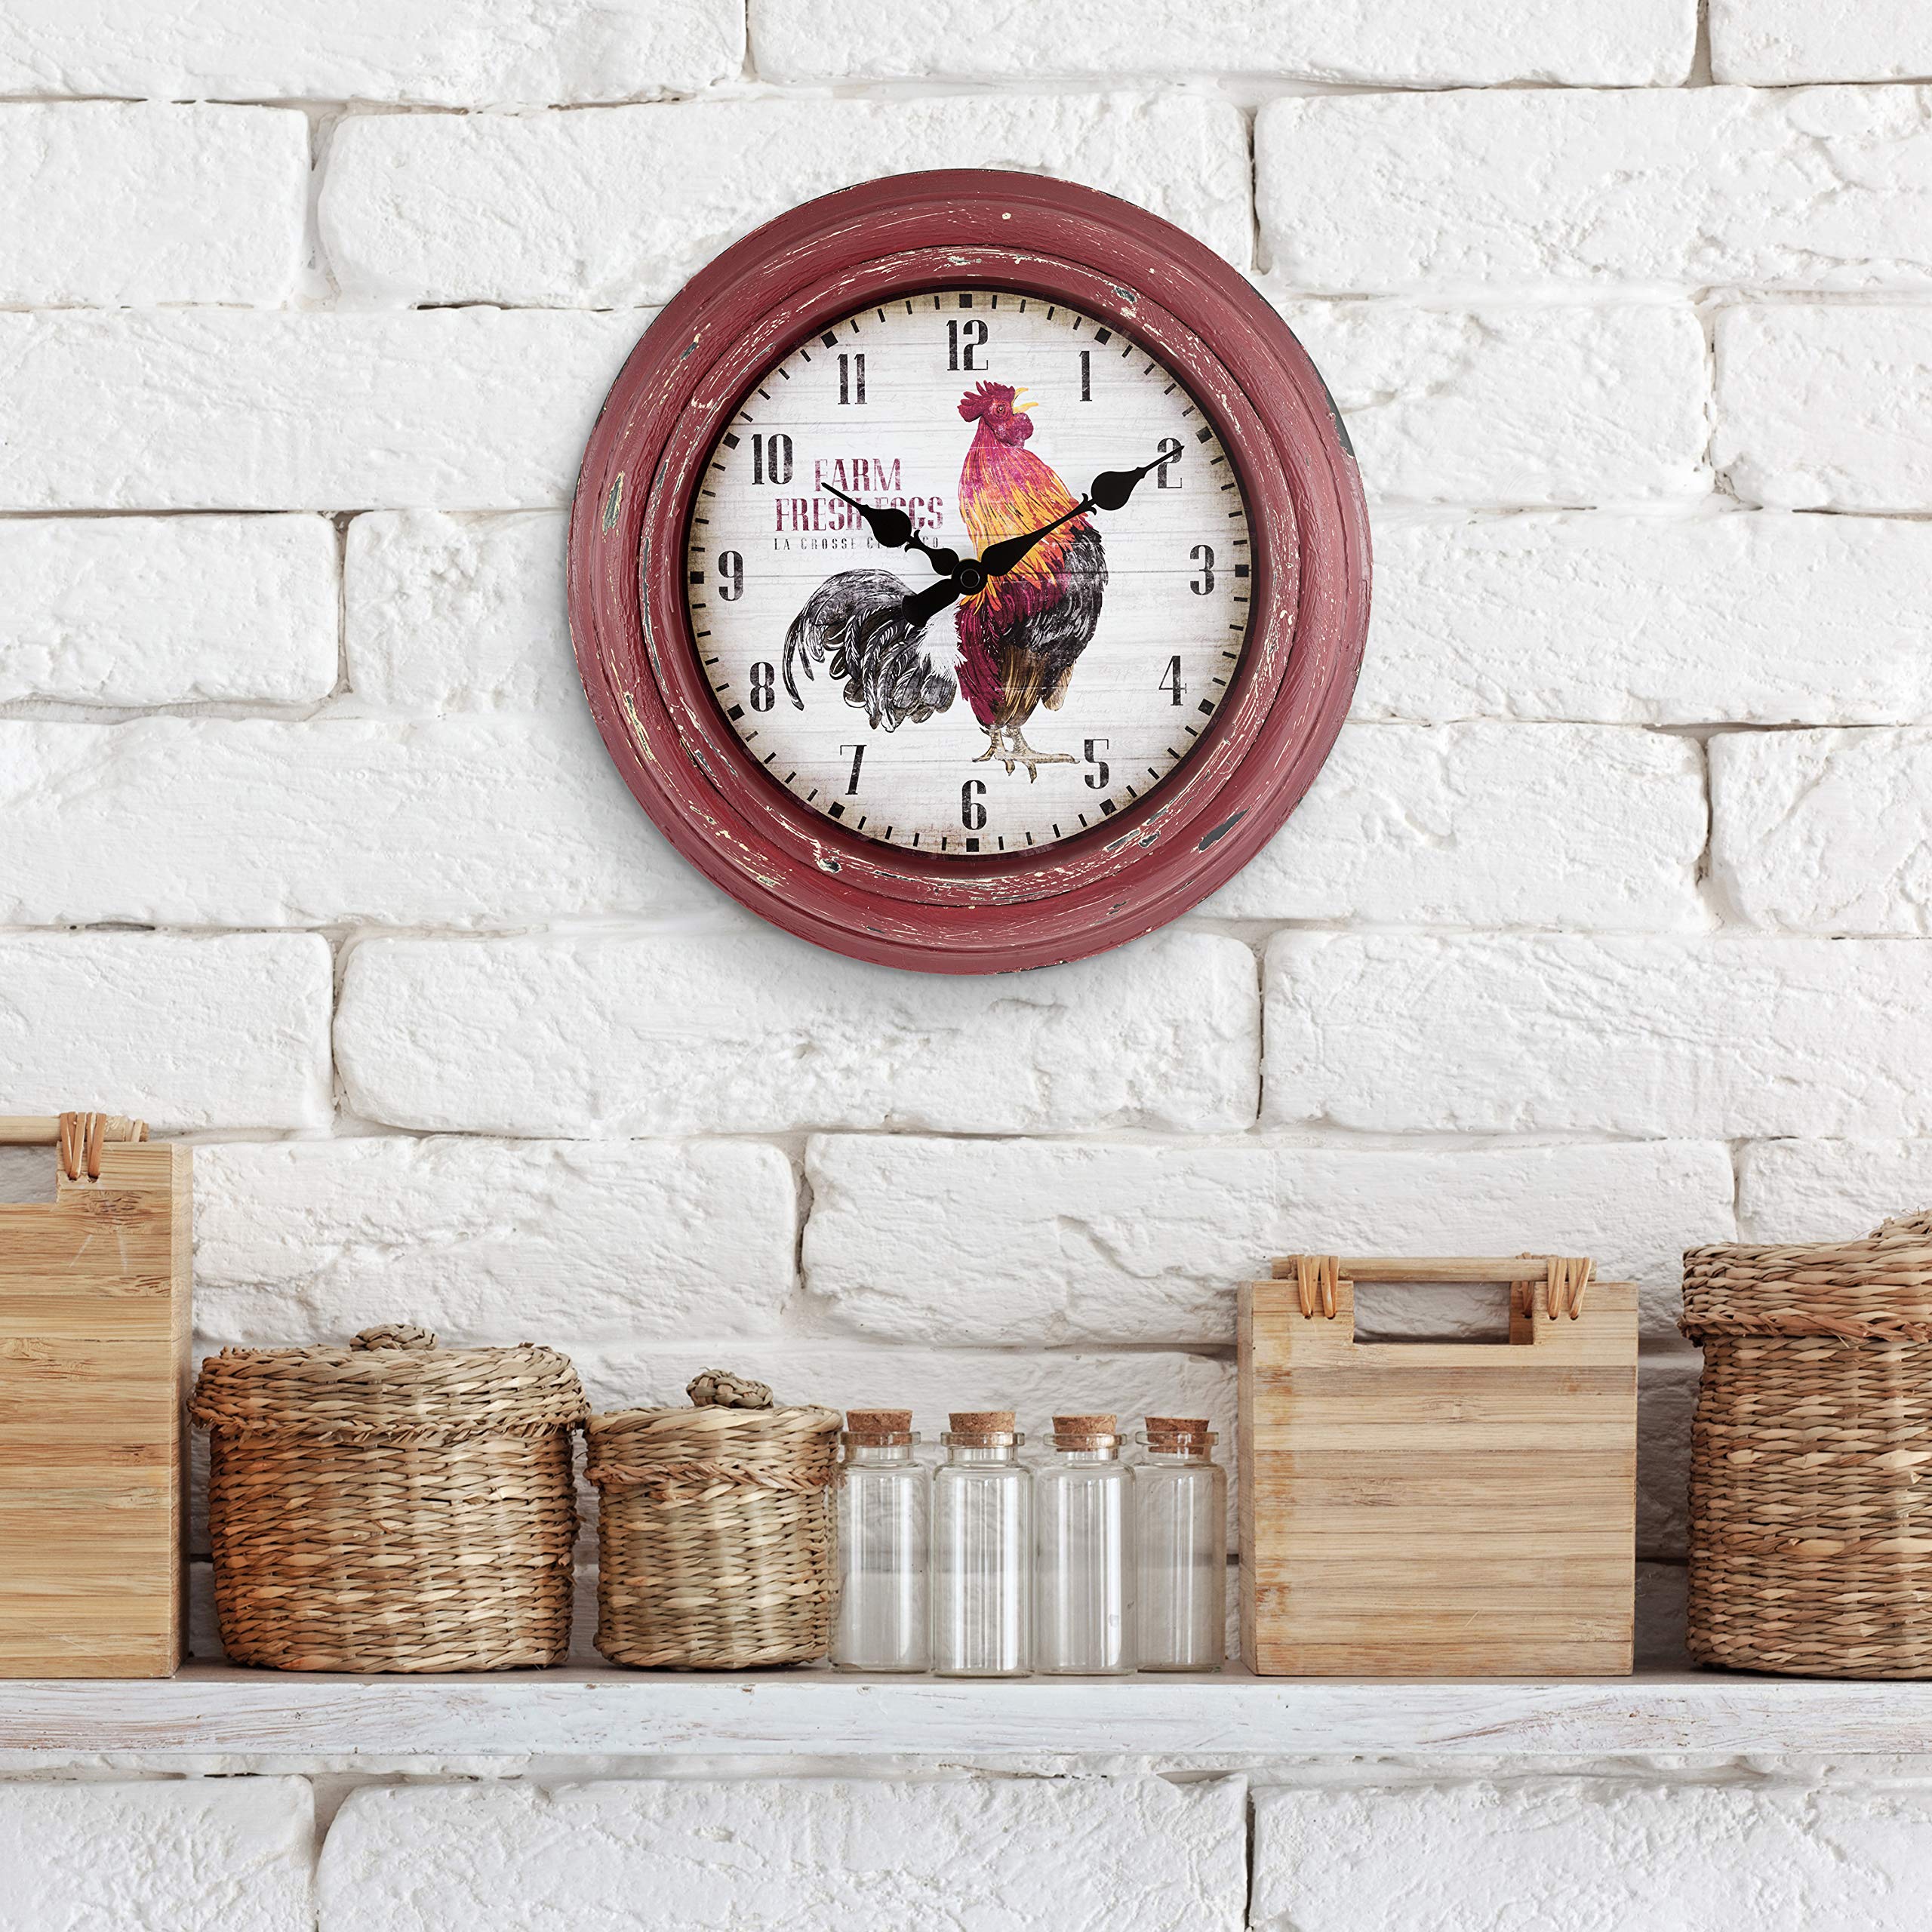 La Crosse Technology 404-3630 12 Inch Distressed Red Rooster Quartz Wall Clock